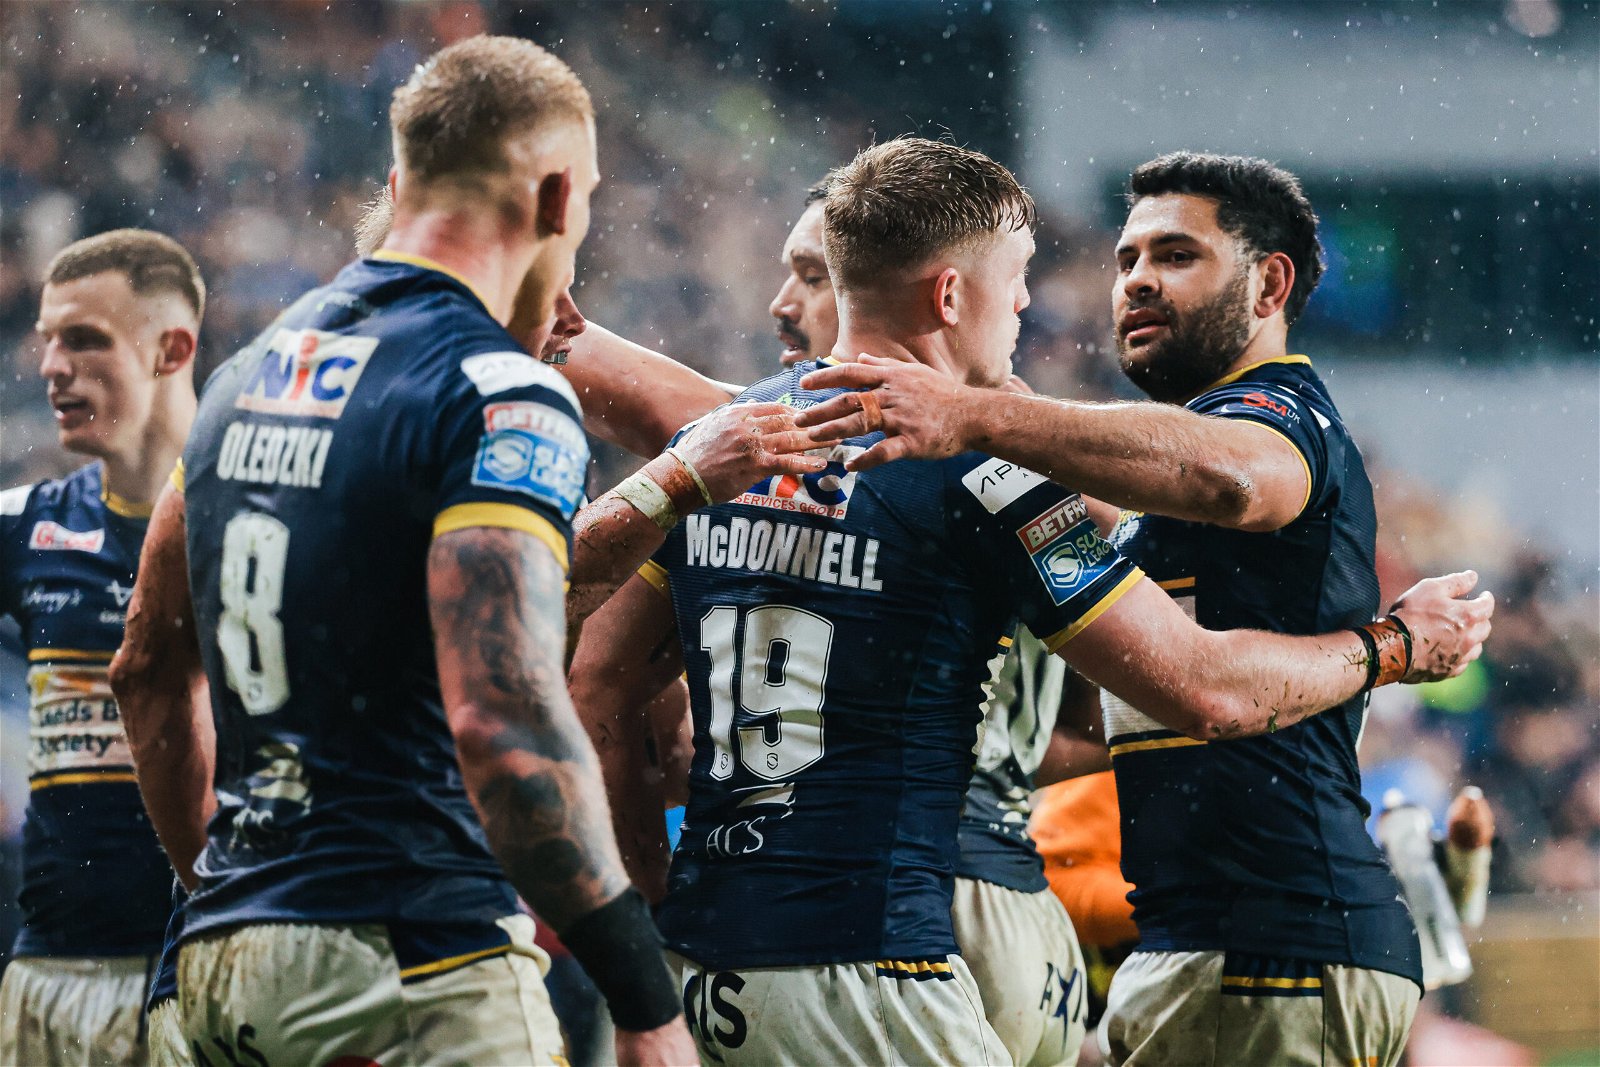 Rhyse Martin is set for a return to his second-row position for Leeds Rhinos this season.